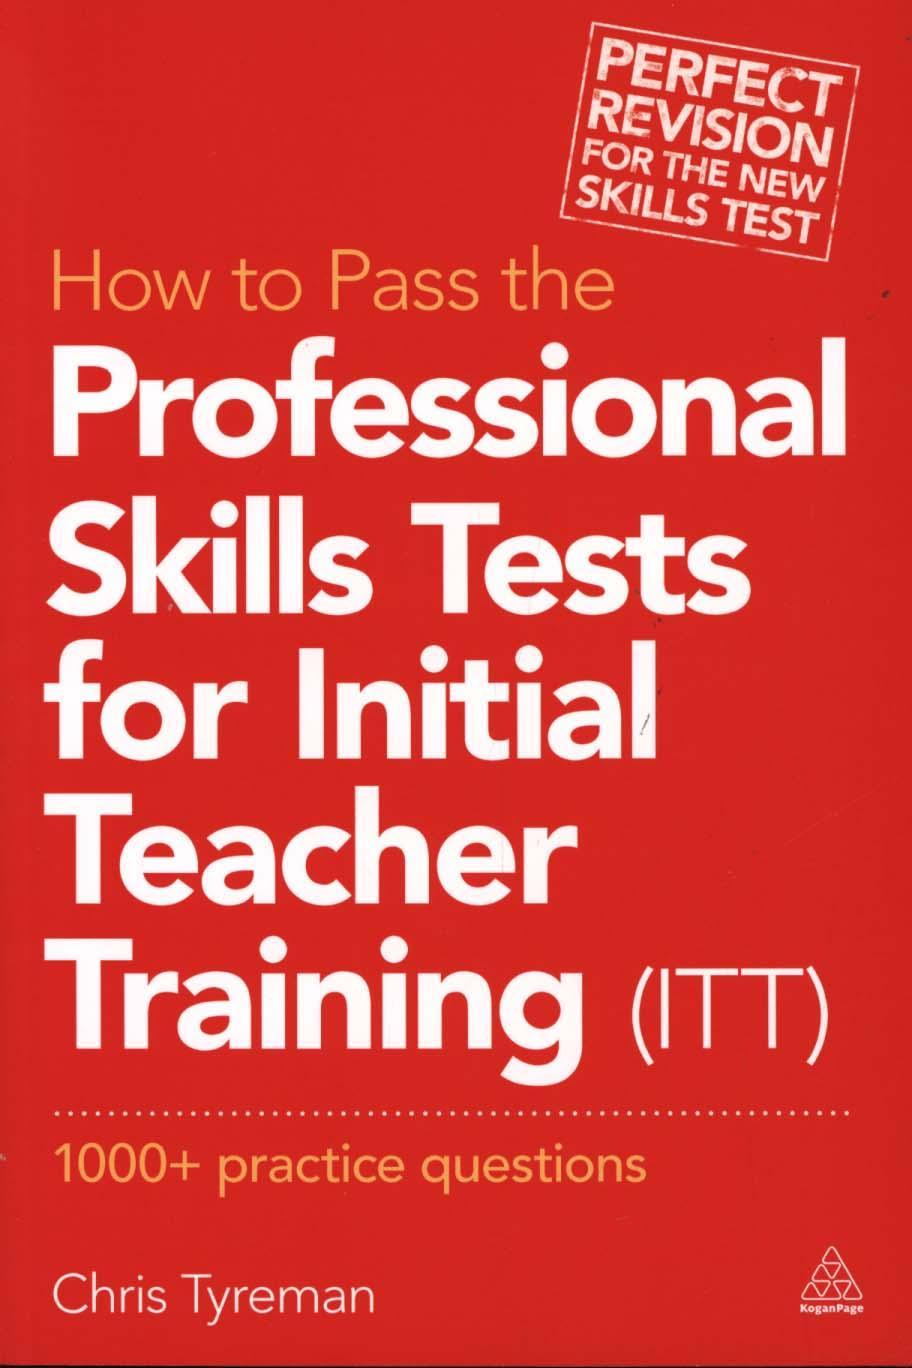 How to Pass the Professional Skills Tests for Initial Teache